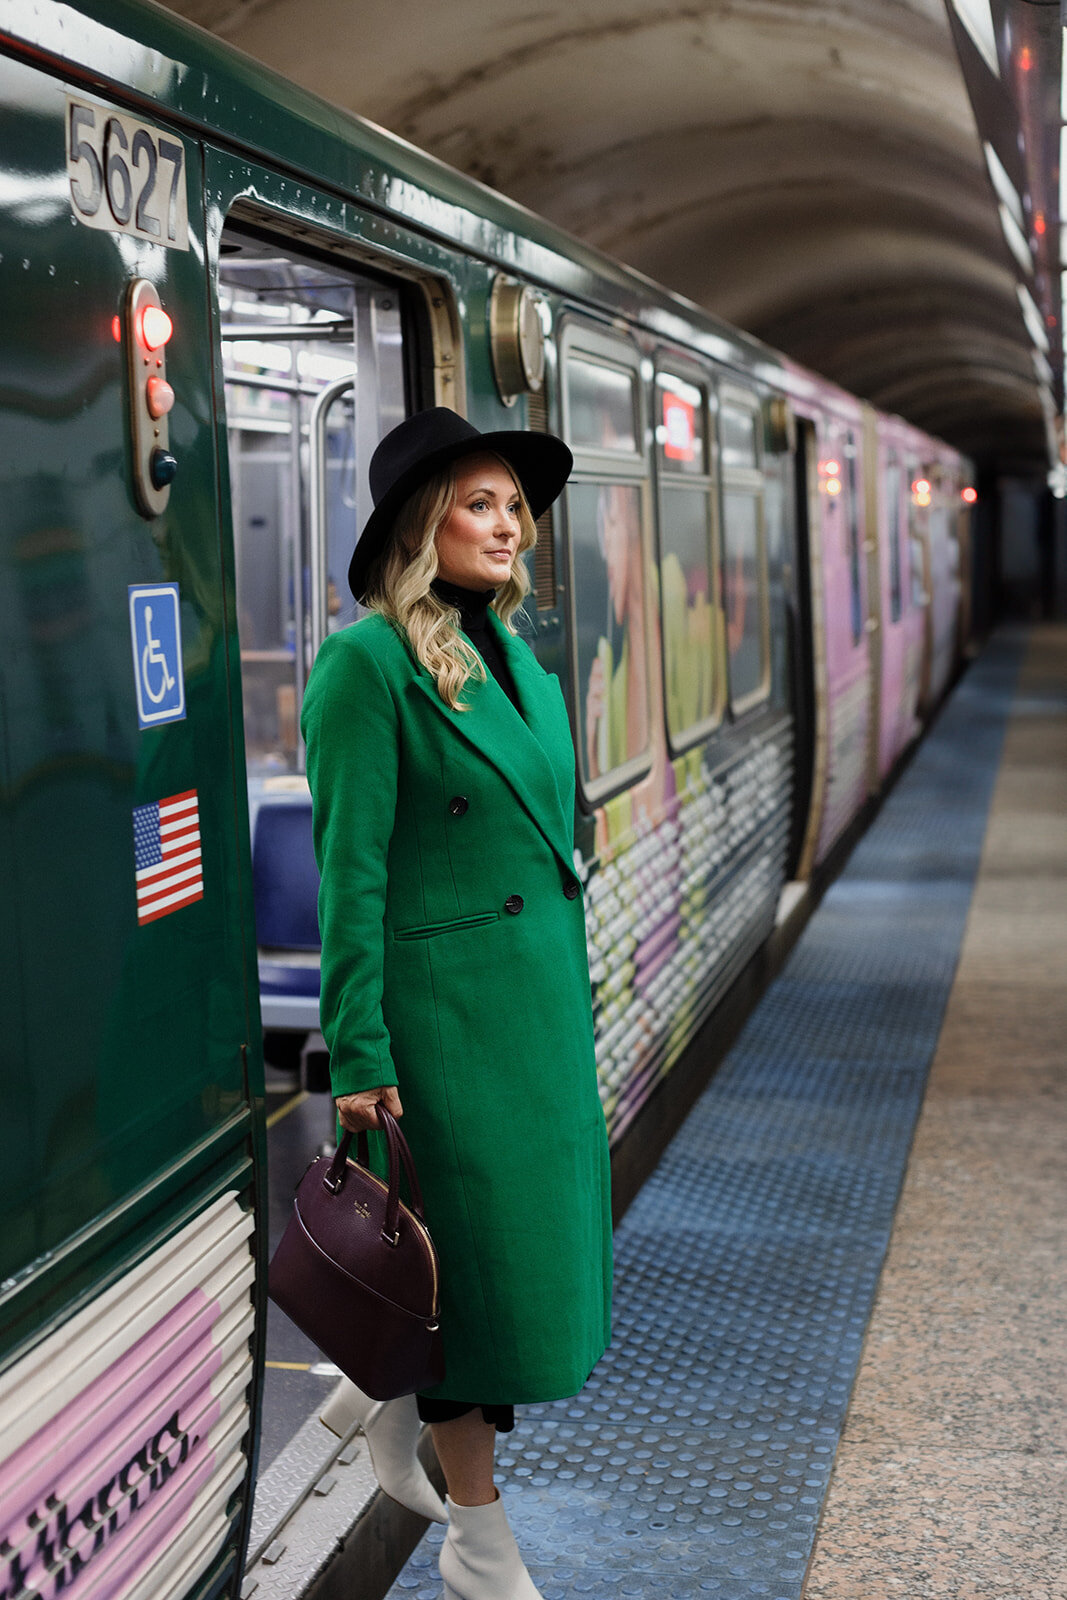 blonde woman in long green coat is stepping off the Chicago L train with a large purse in her hand.